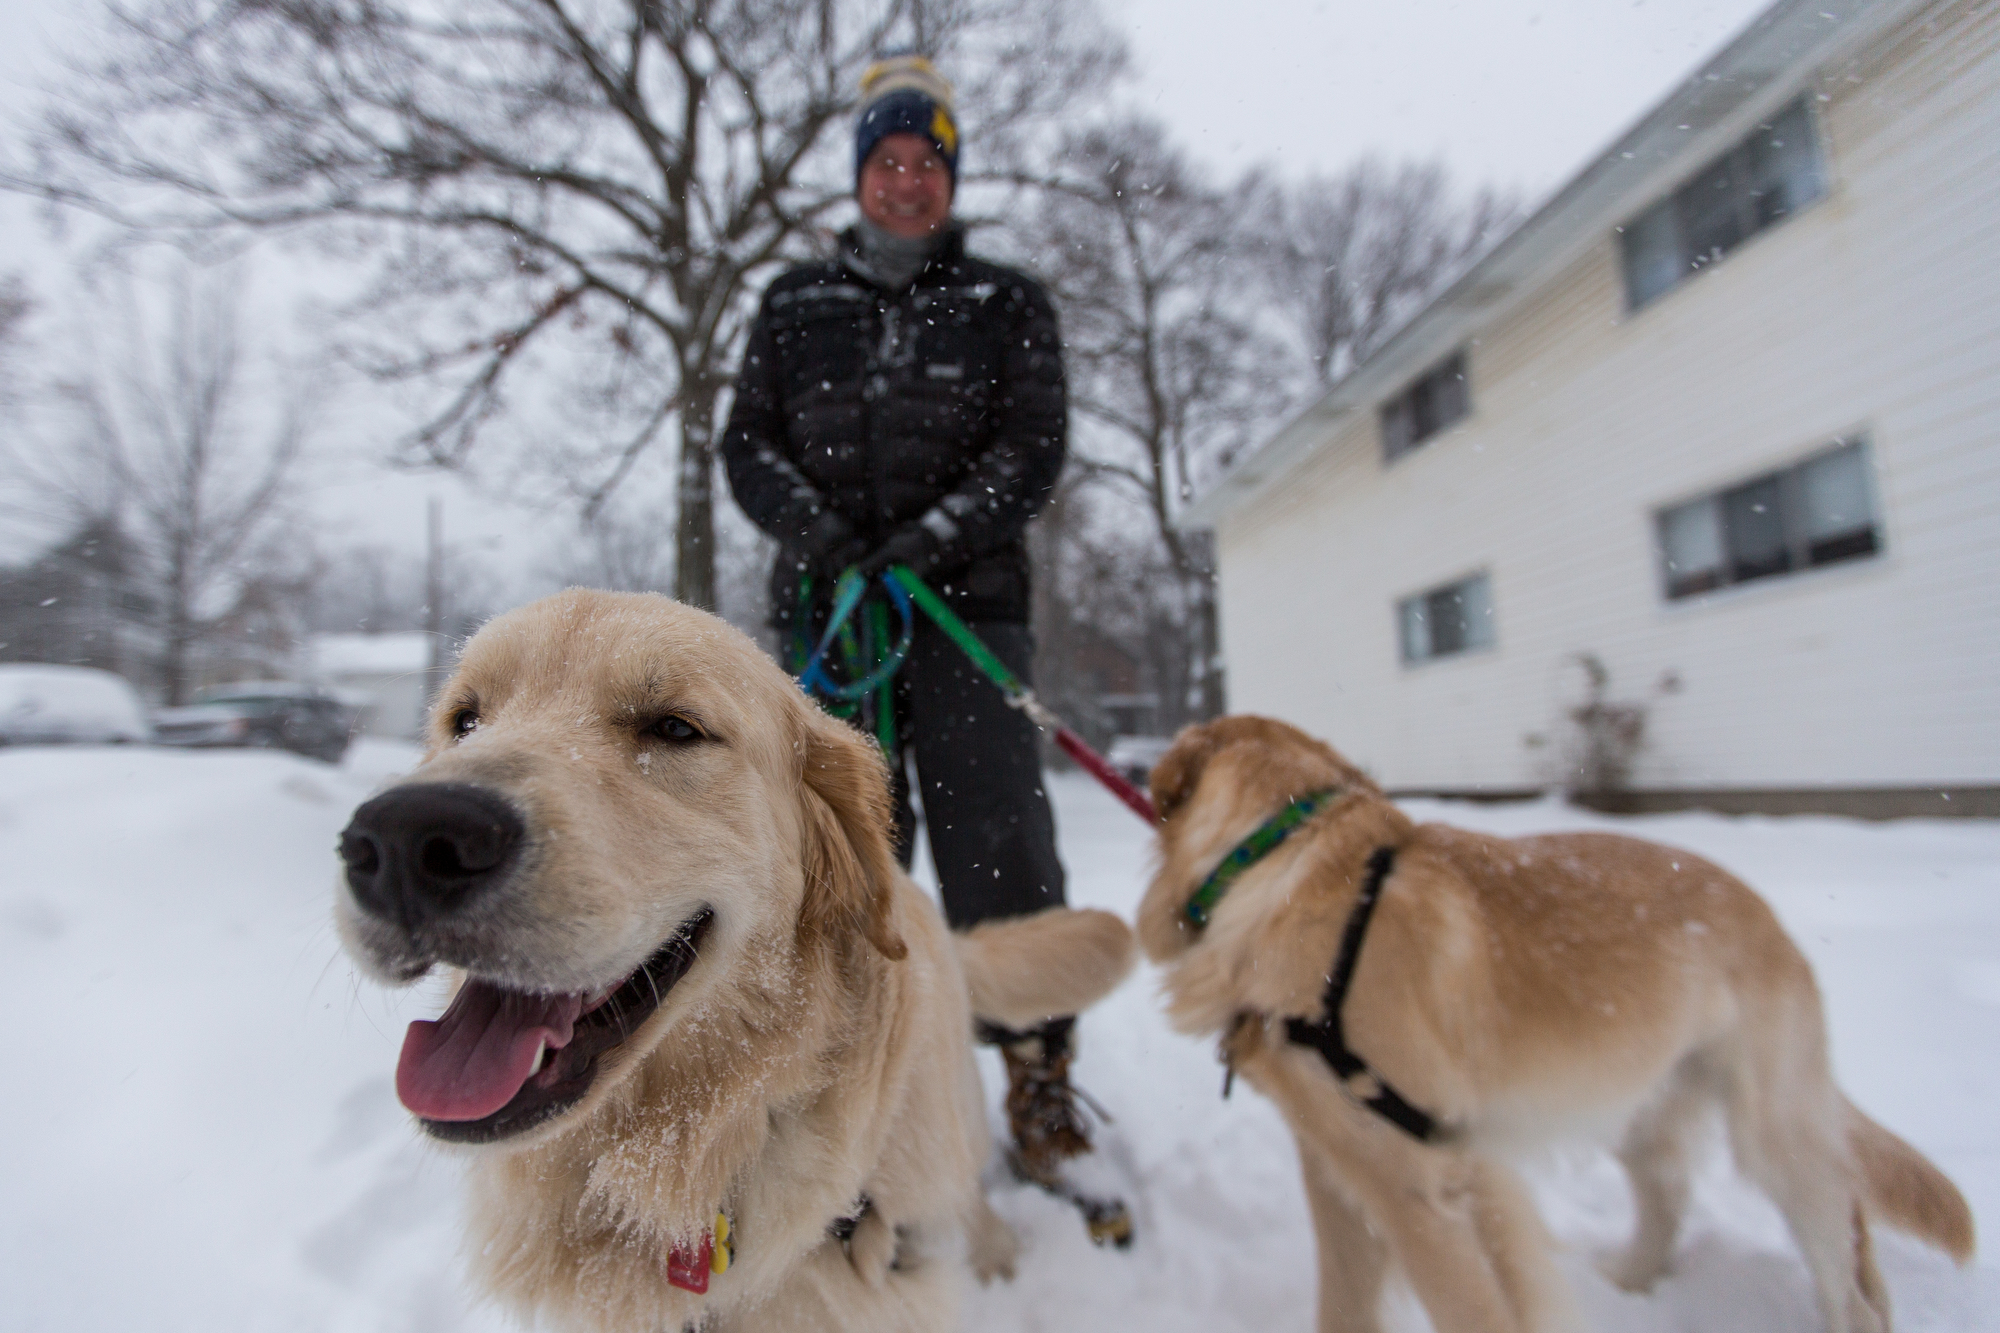  Hal Chrisman walks Ollie, 9 months, left and Oslo, 18 months, along West Mosley Street on Sunday, December 11, 2016. Ann Arbor saw its first significant snowfall on Sunday and a total of 6 to 10 inches is expected by the end of the day. Matt Weigand